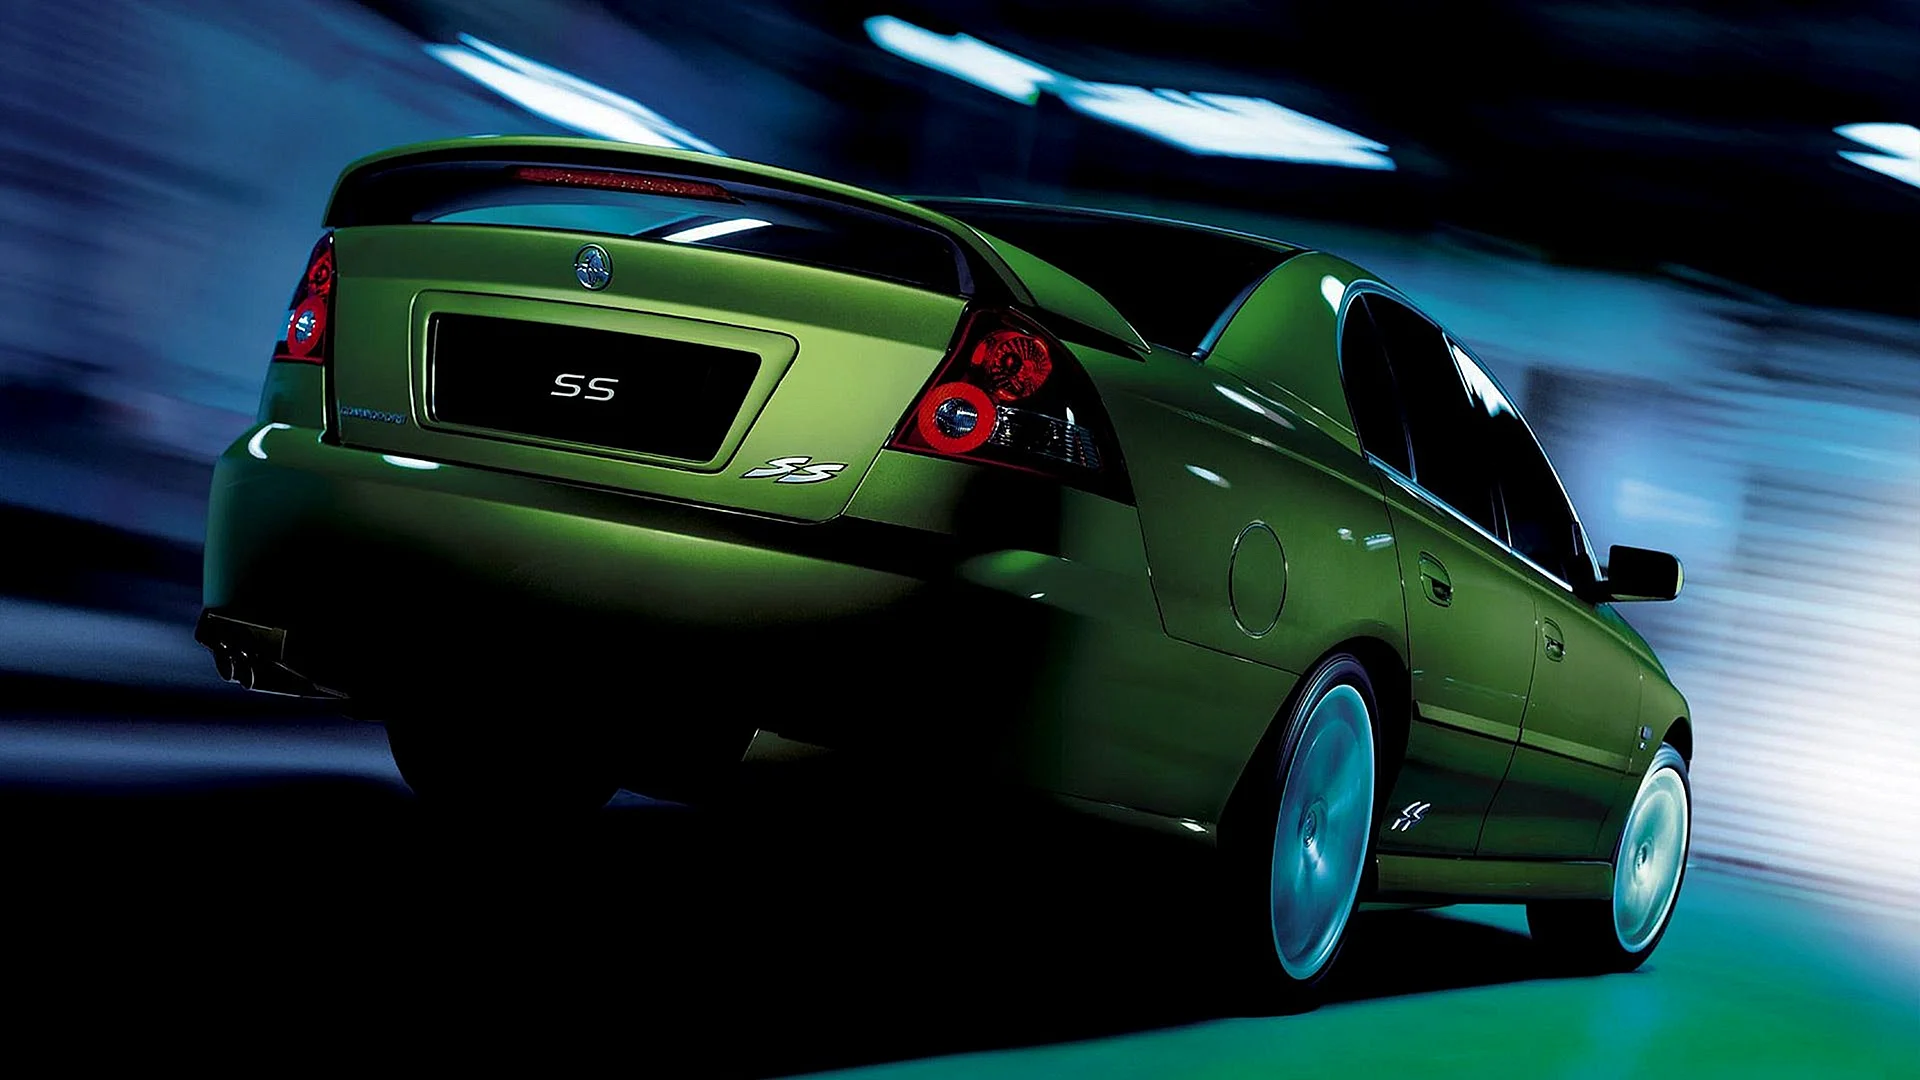 Holden Commodore Vy Wallpaper